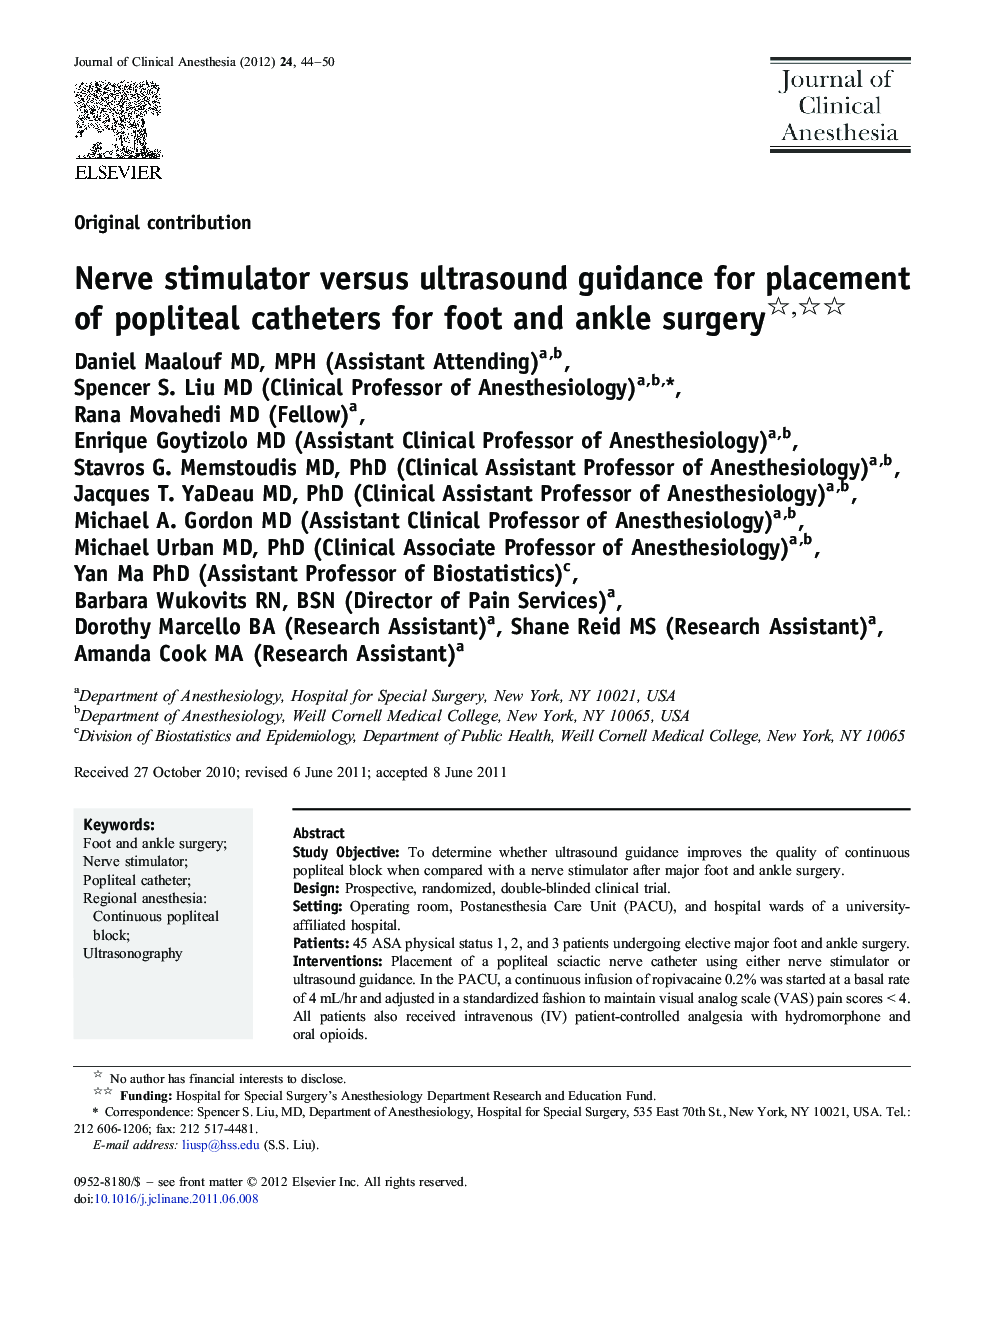 Nerve stimulator versus ultrasound guidance for placement of popliteal catheters for foot and ankle surgery 